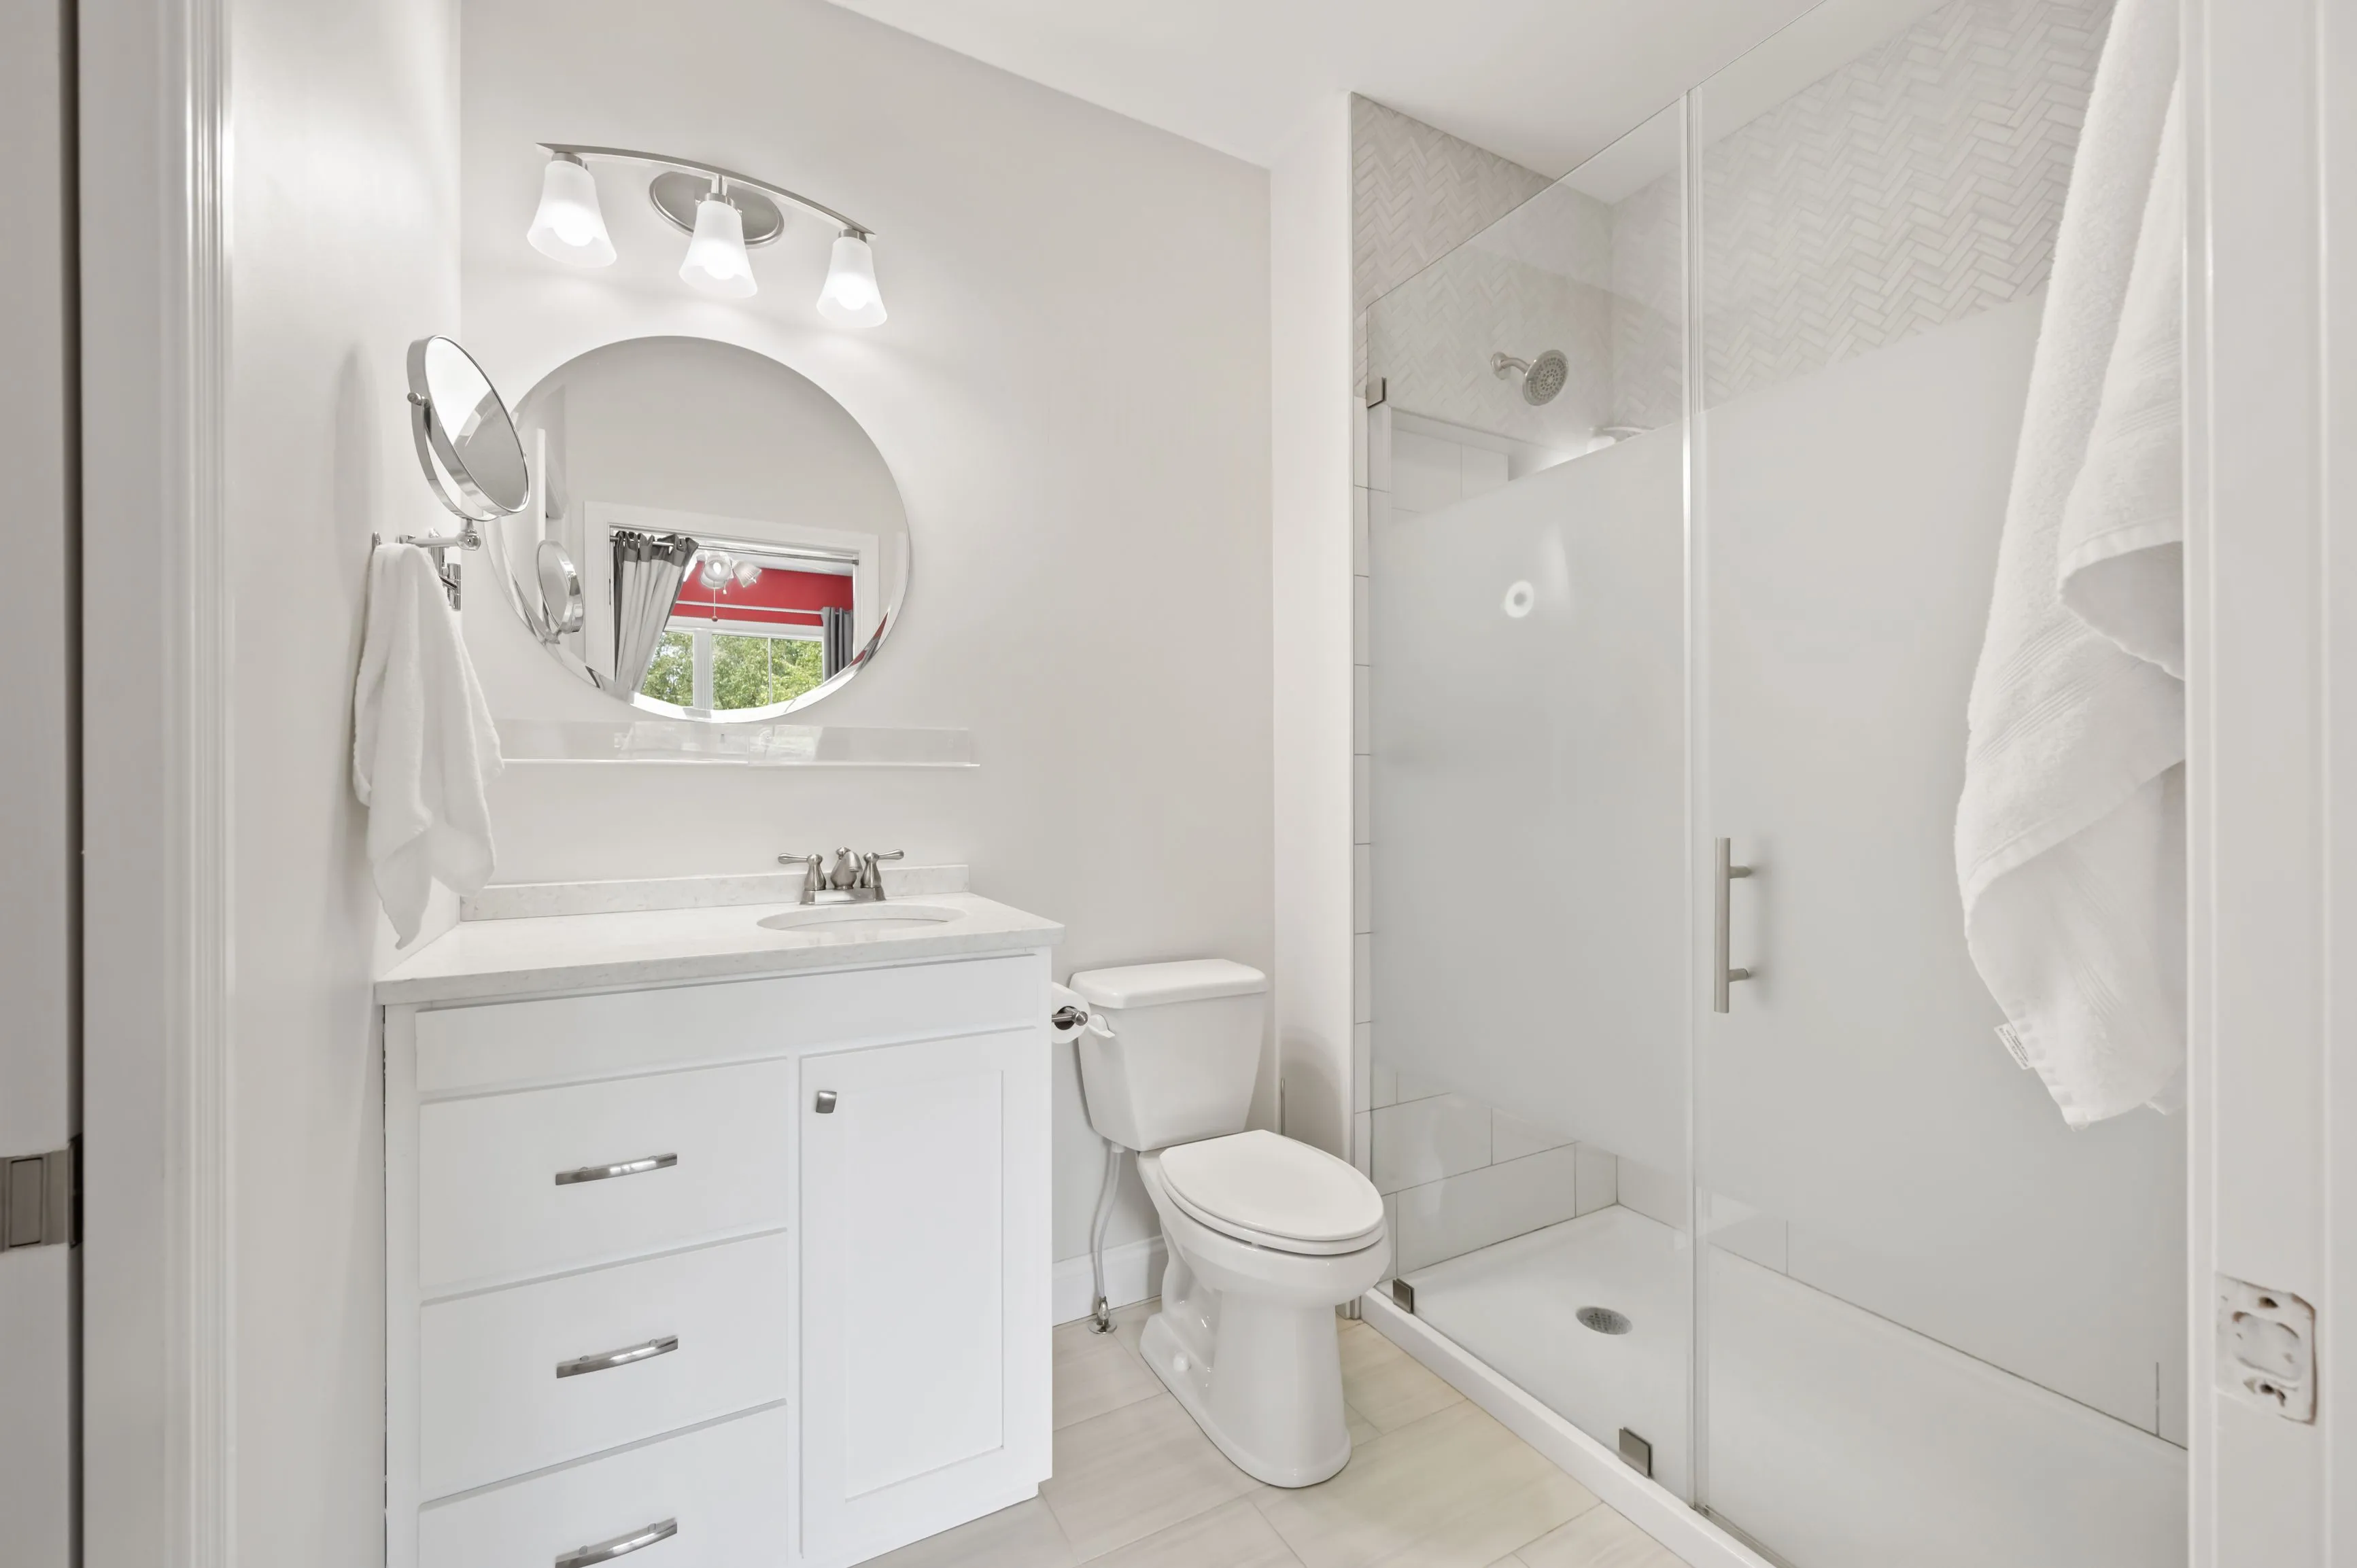 Bright modern bathroom with a white vanity, circular mirror, toilet, and shower area.